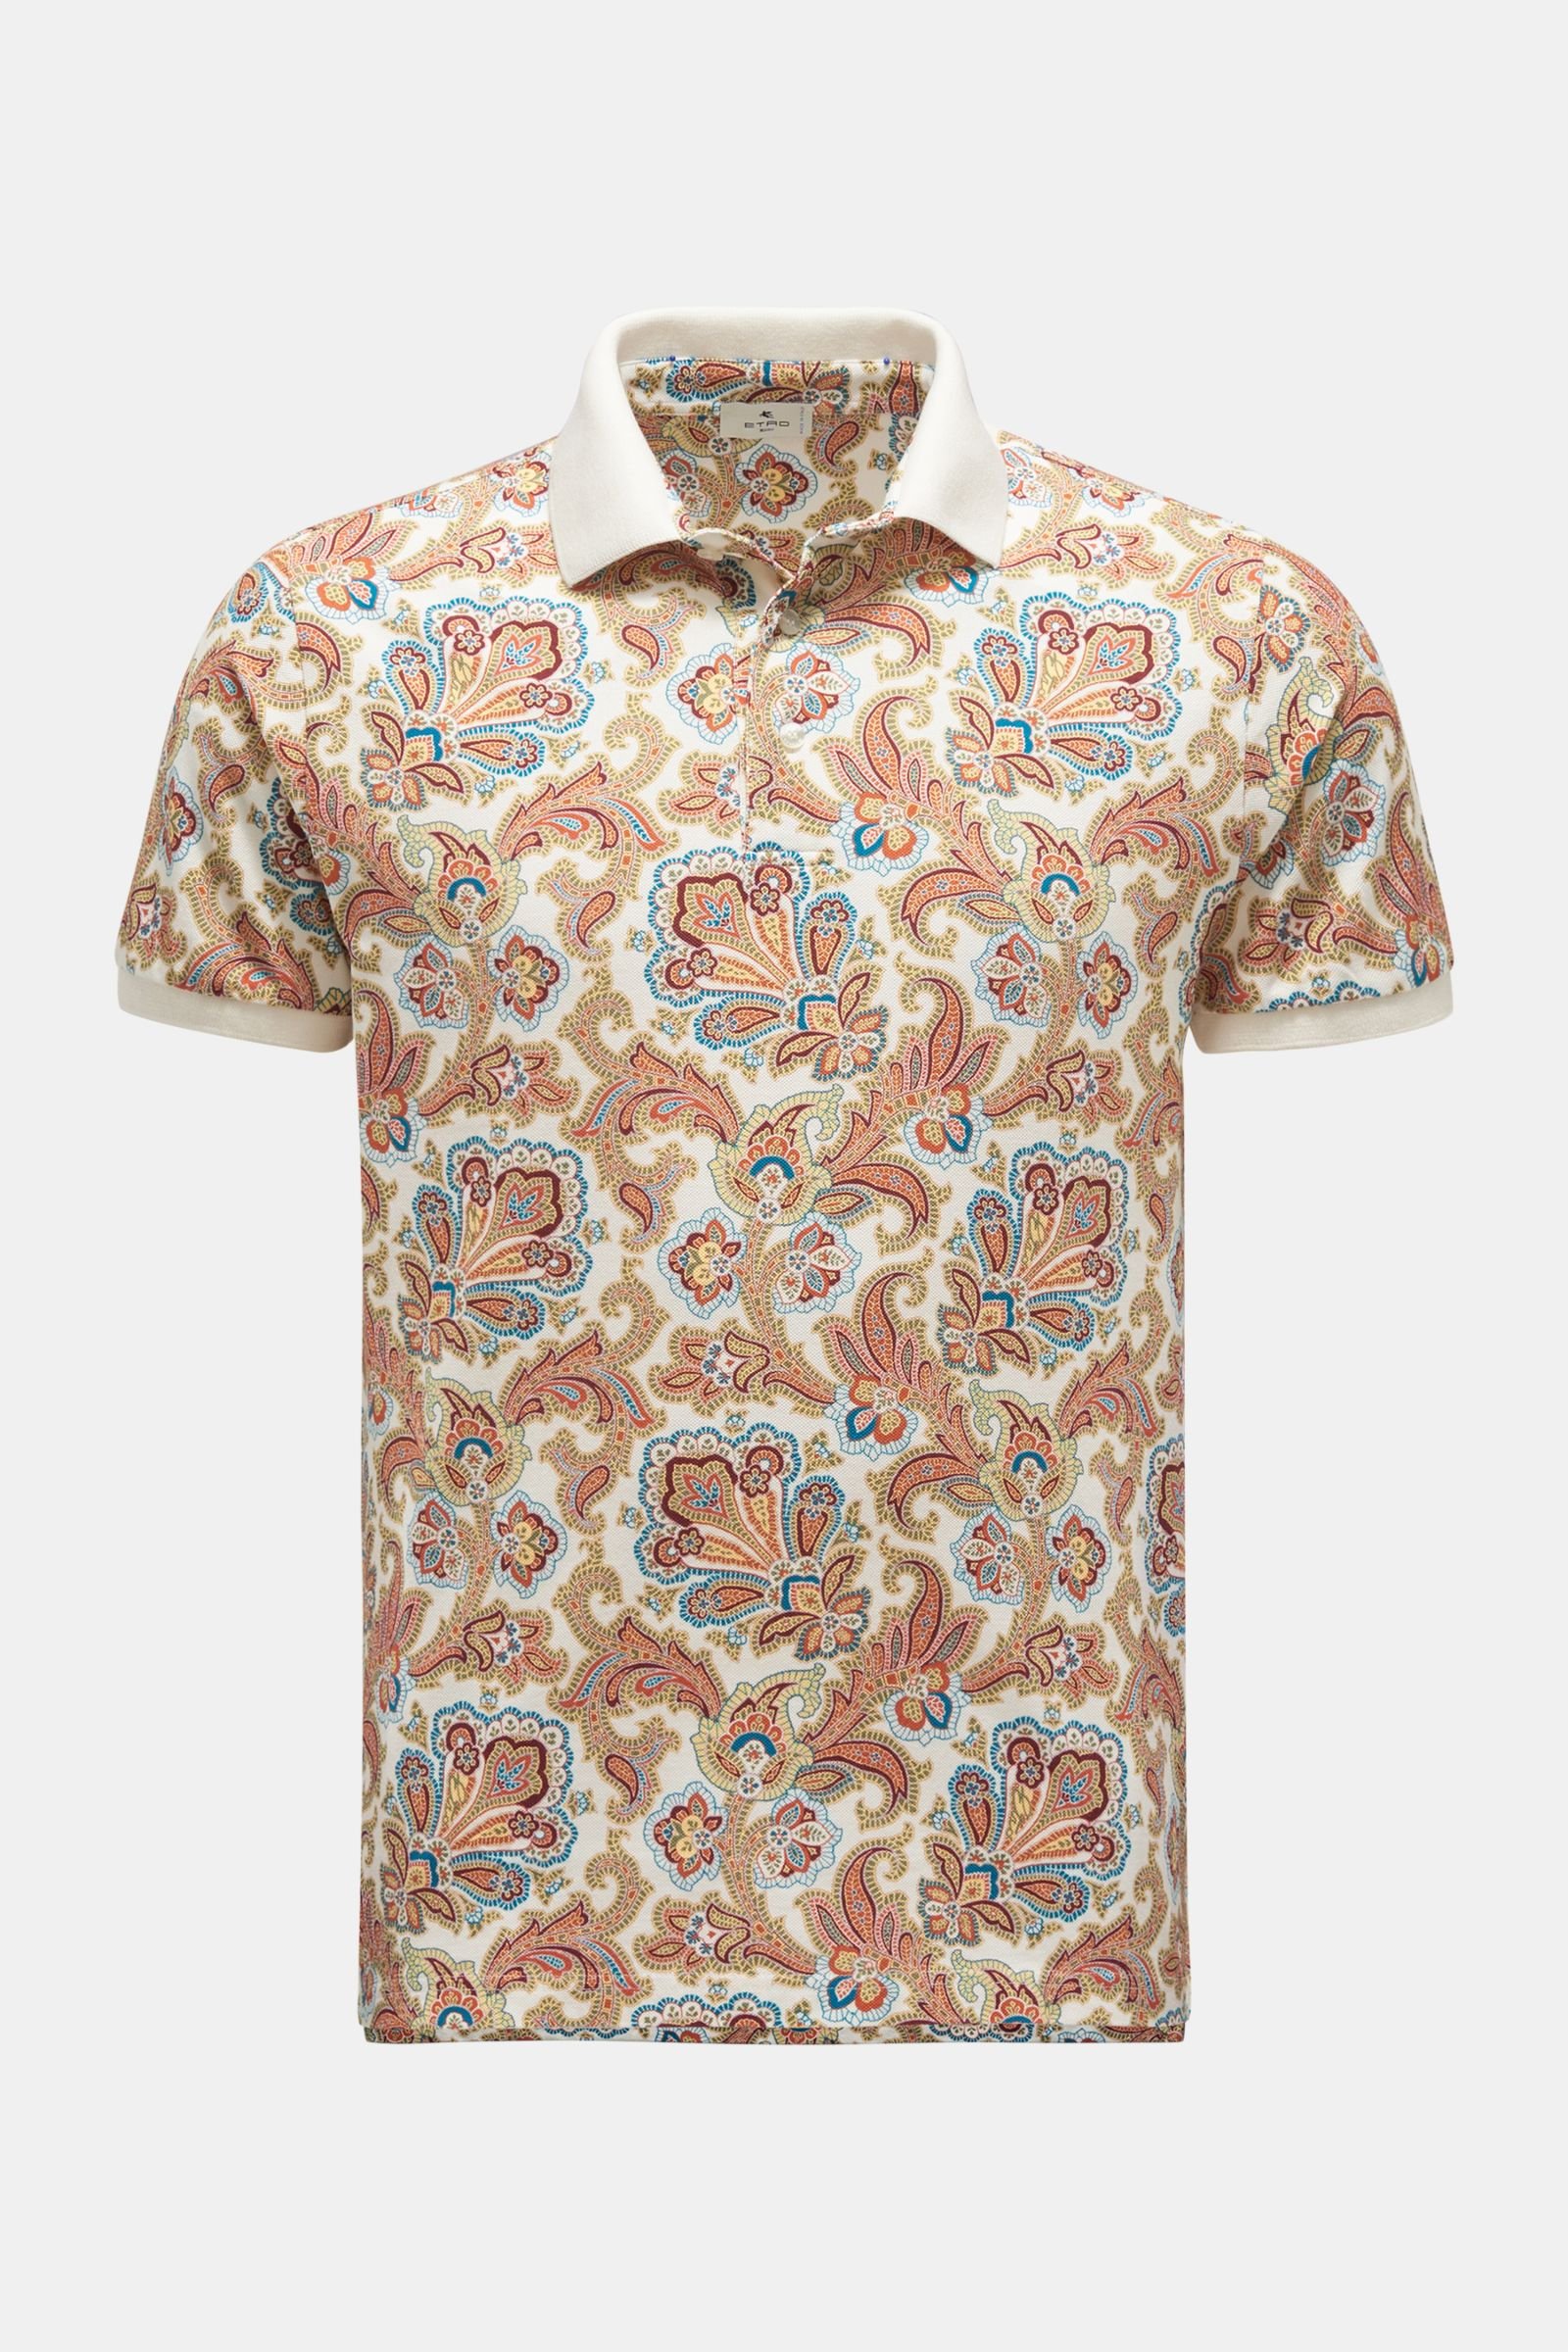 Polo shirt off-white/rust brown patterned